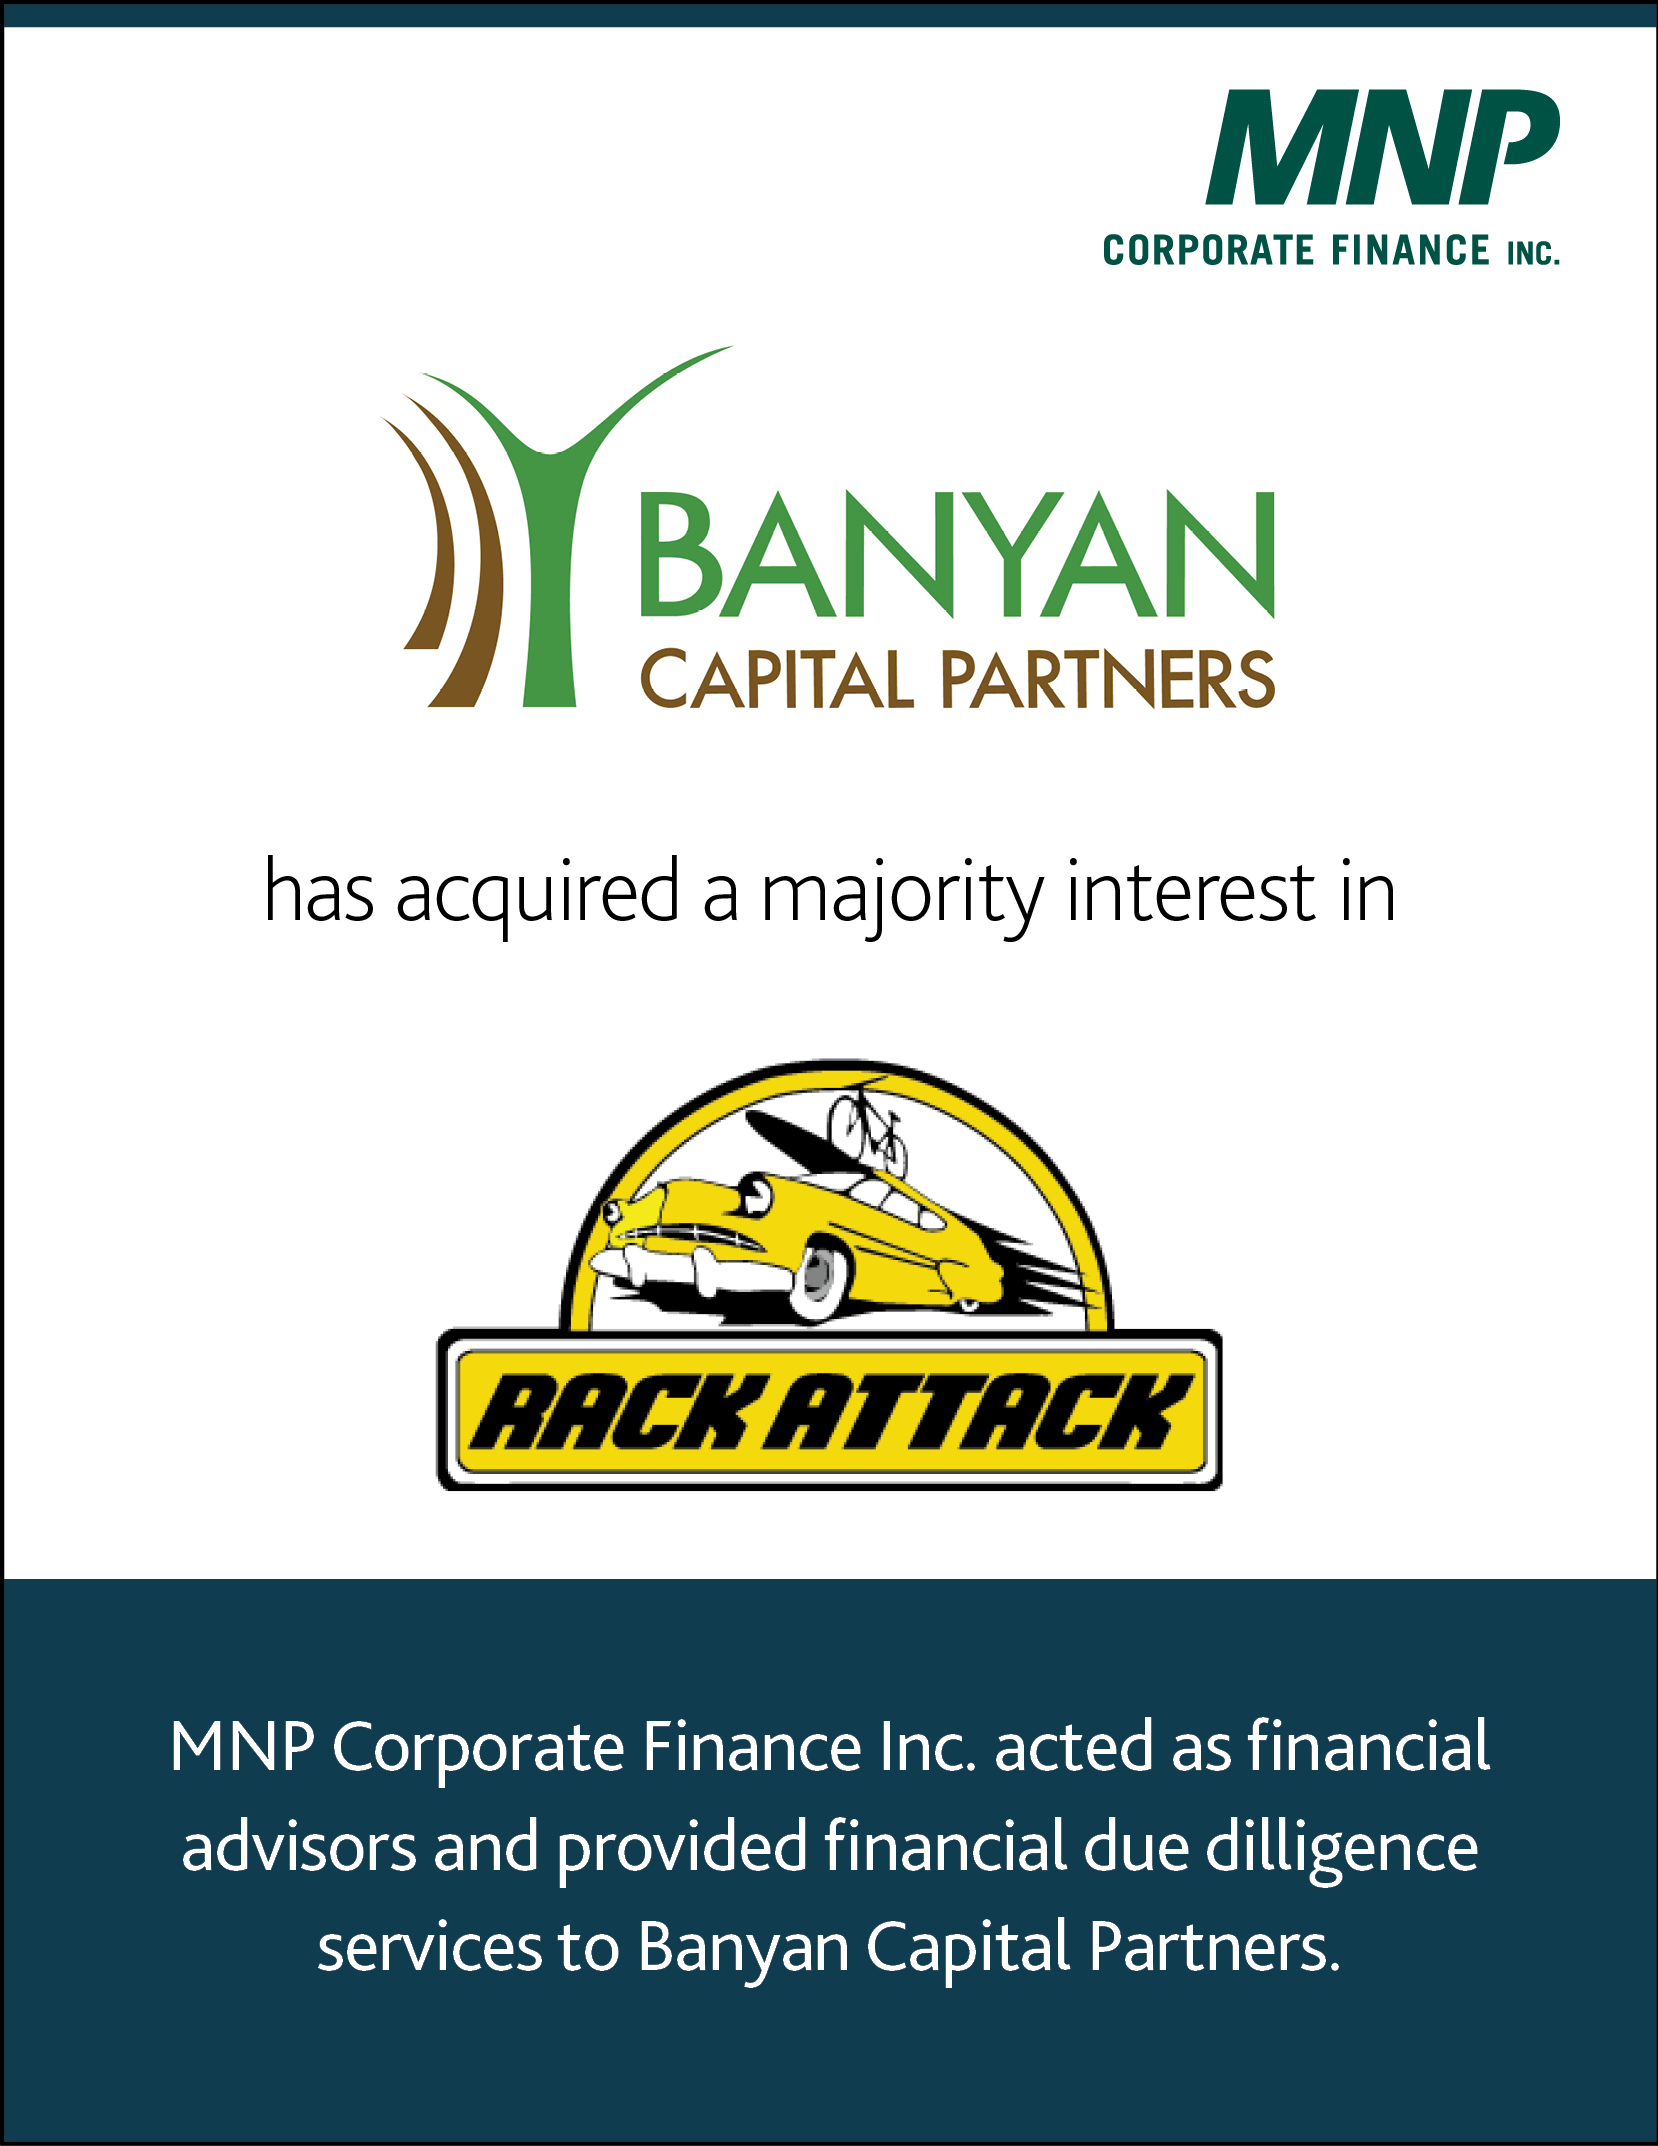 Banyan Capital Partners has acquired a majority interest in Rack Attack. 